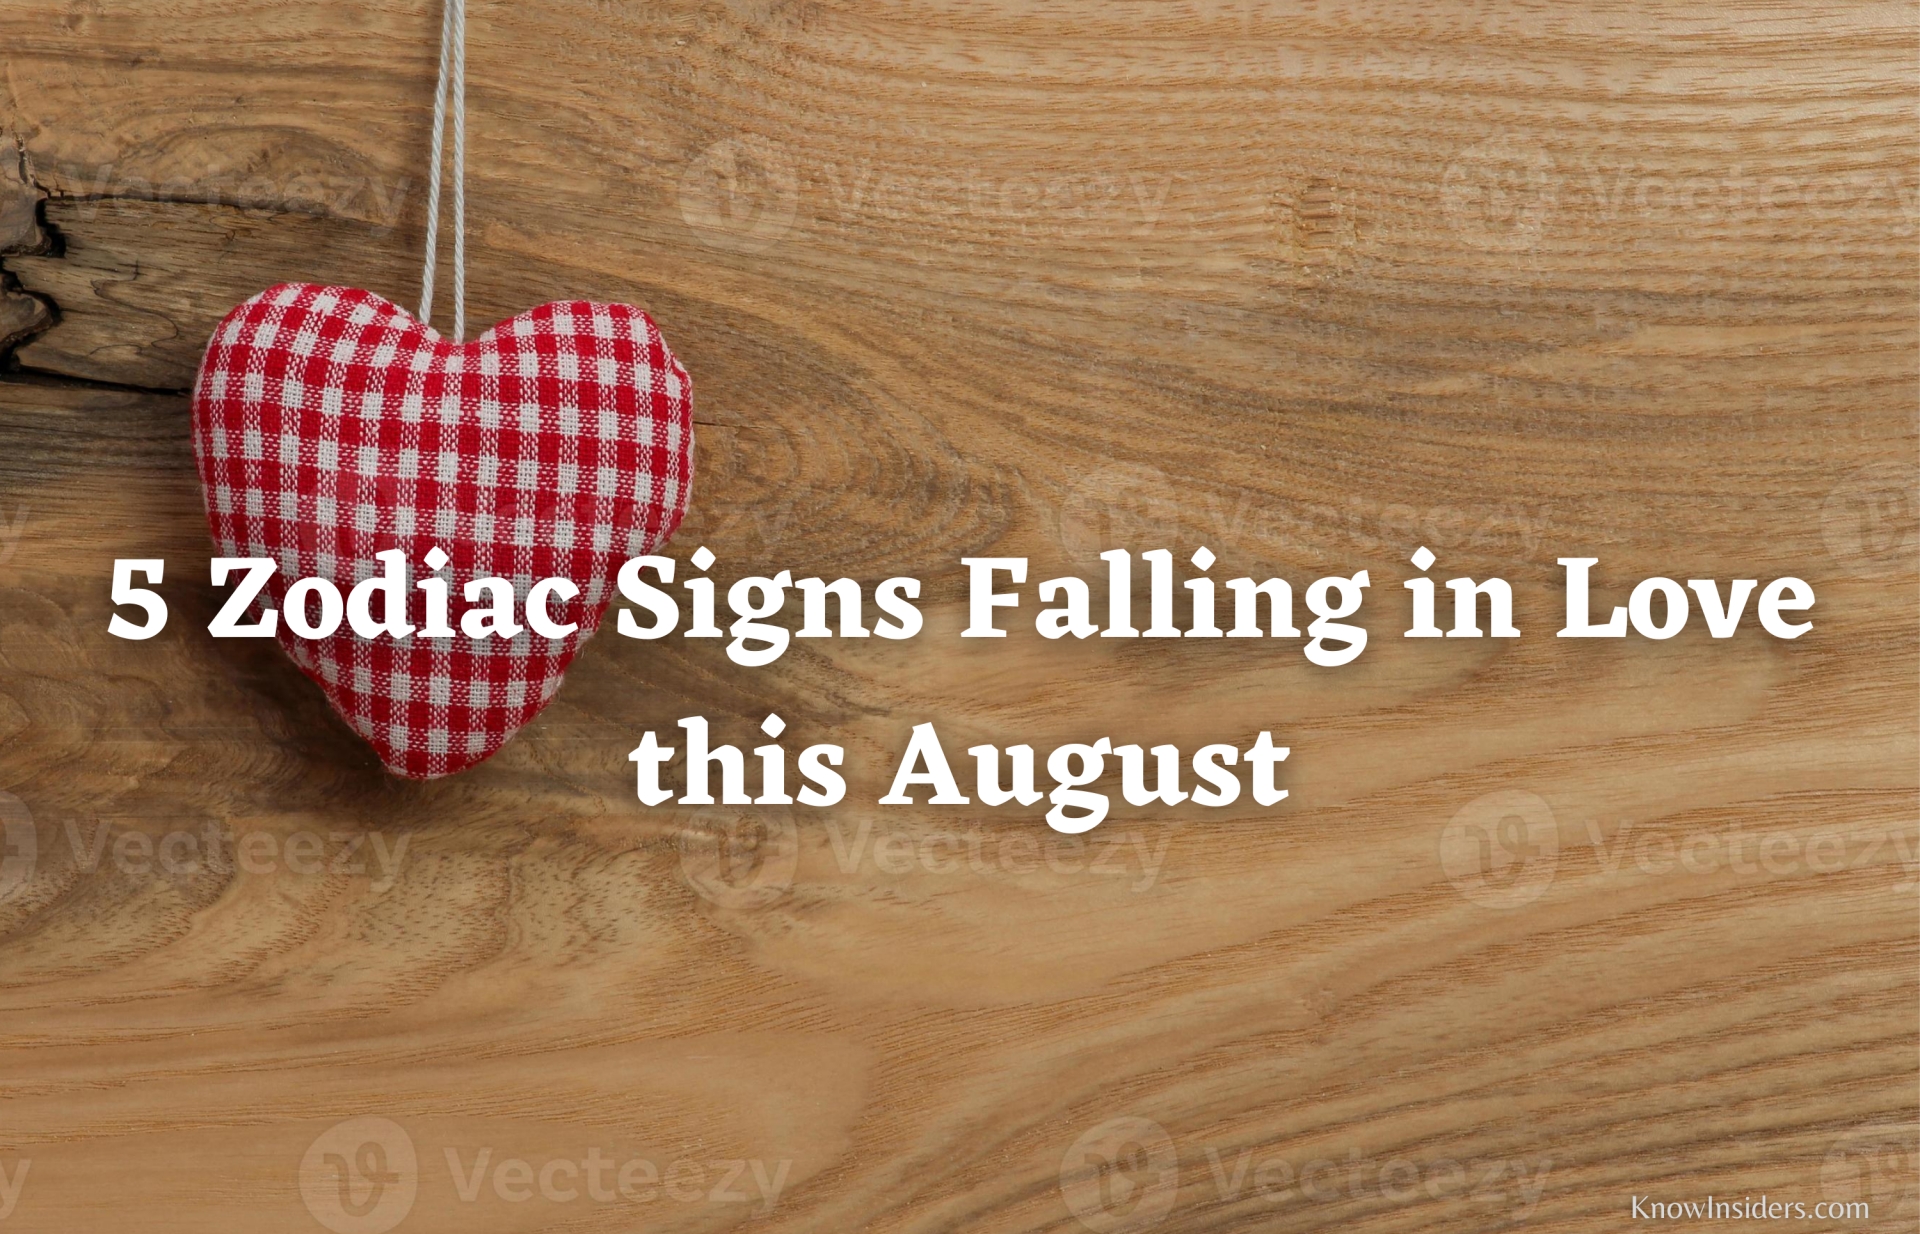 Top 5 Zodiac Signs Will Fall in Love in August